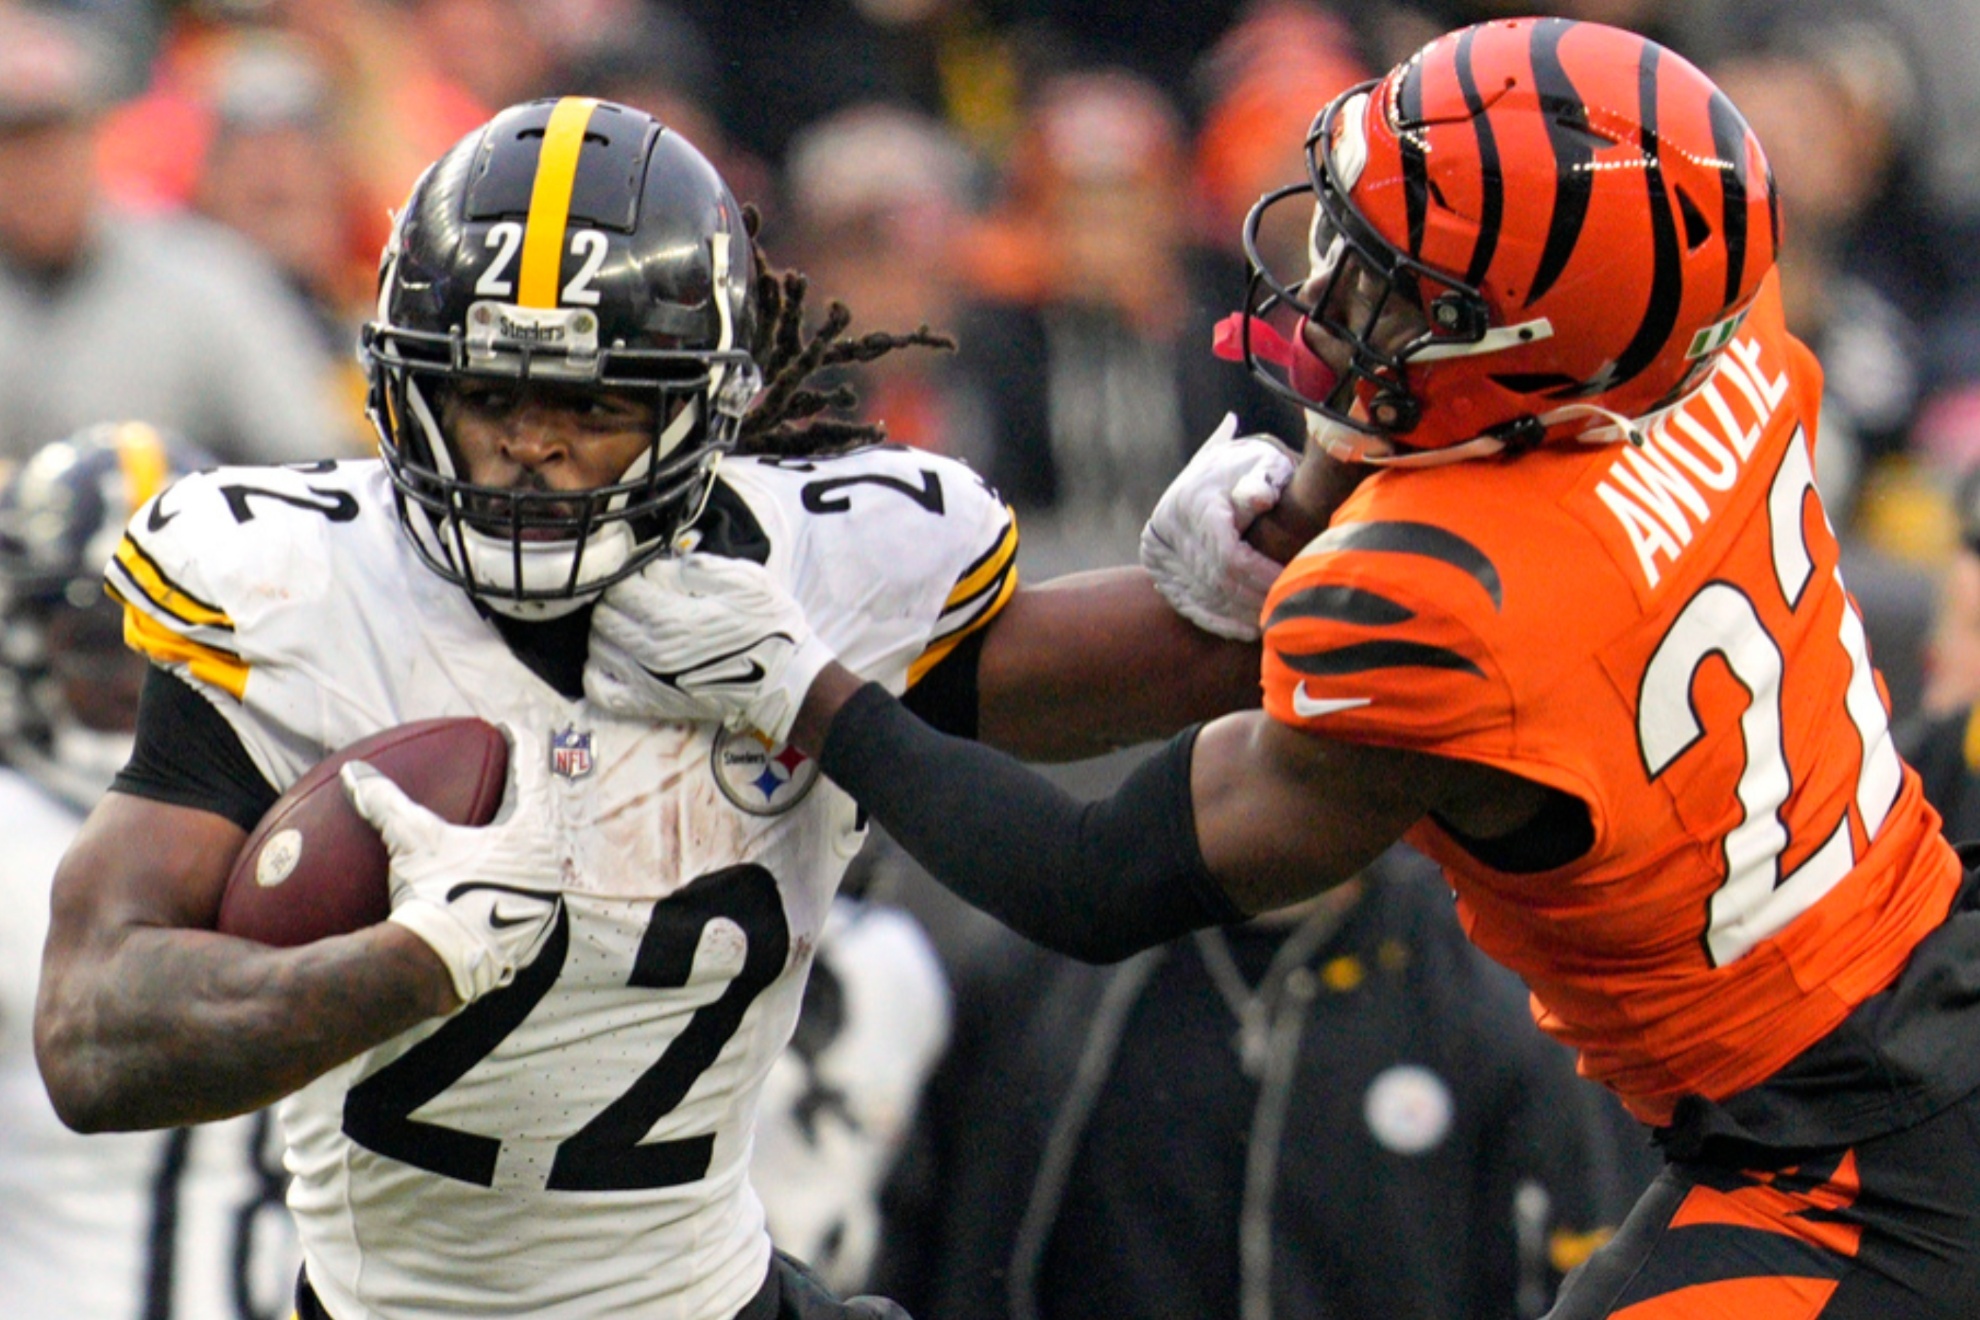 The Pittsburgh Steelers won a crucial divisional game against the Bengals on Sunday